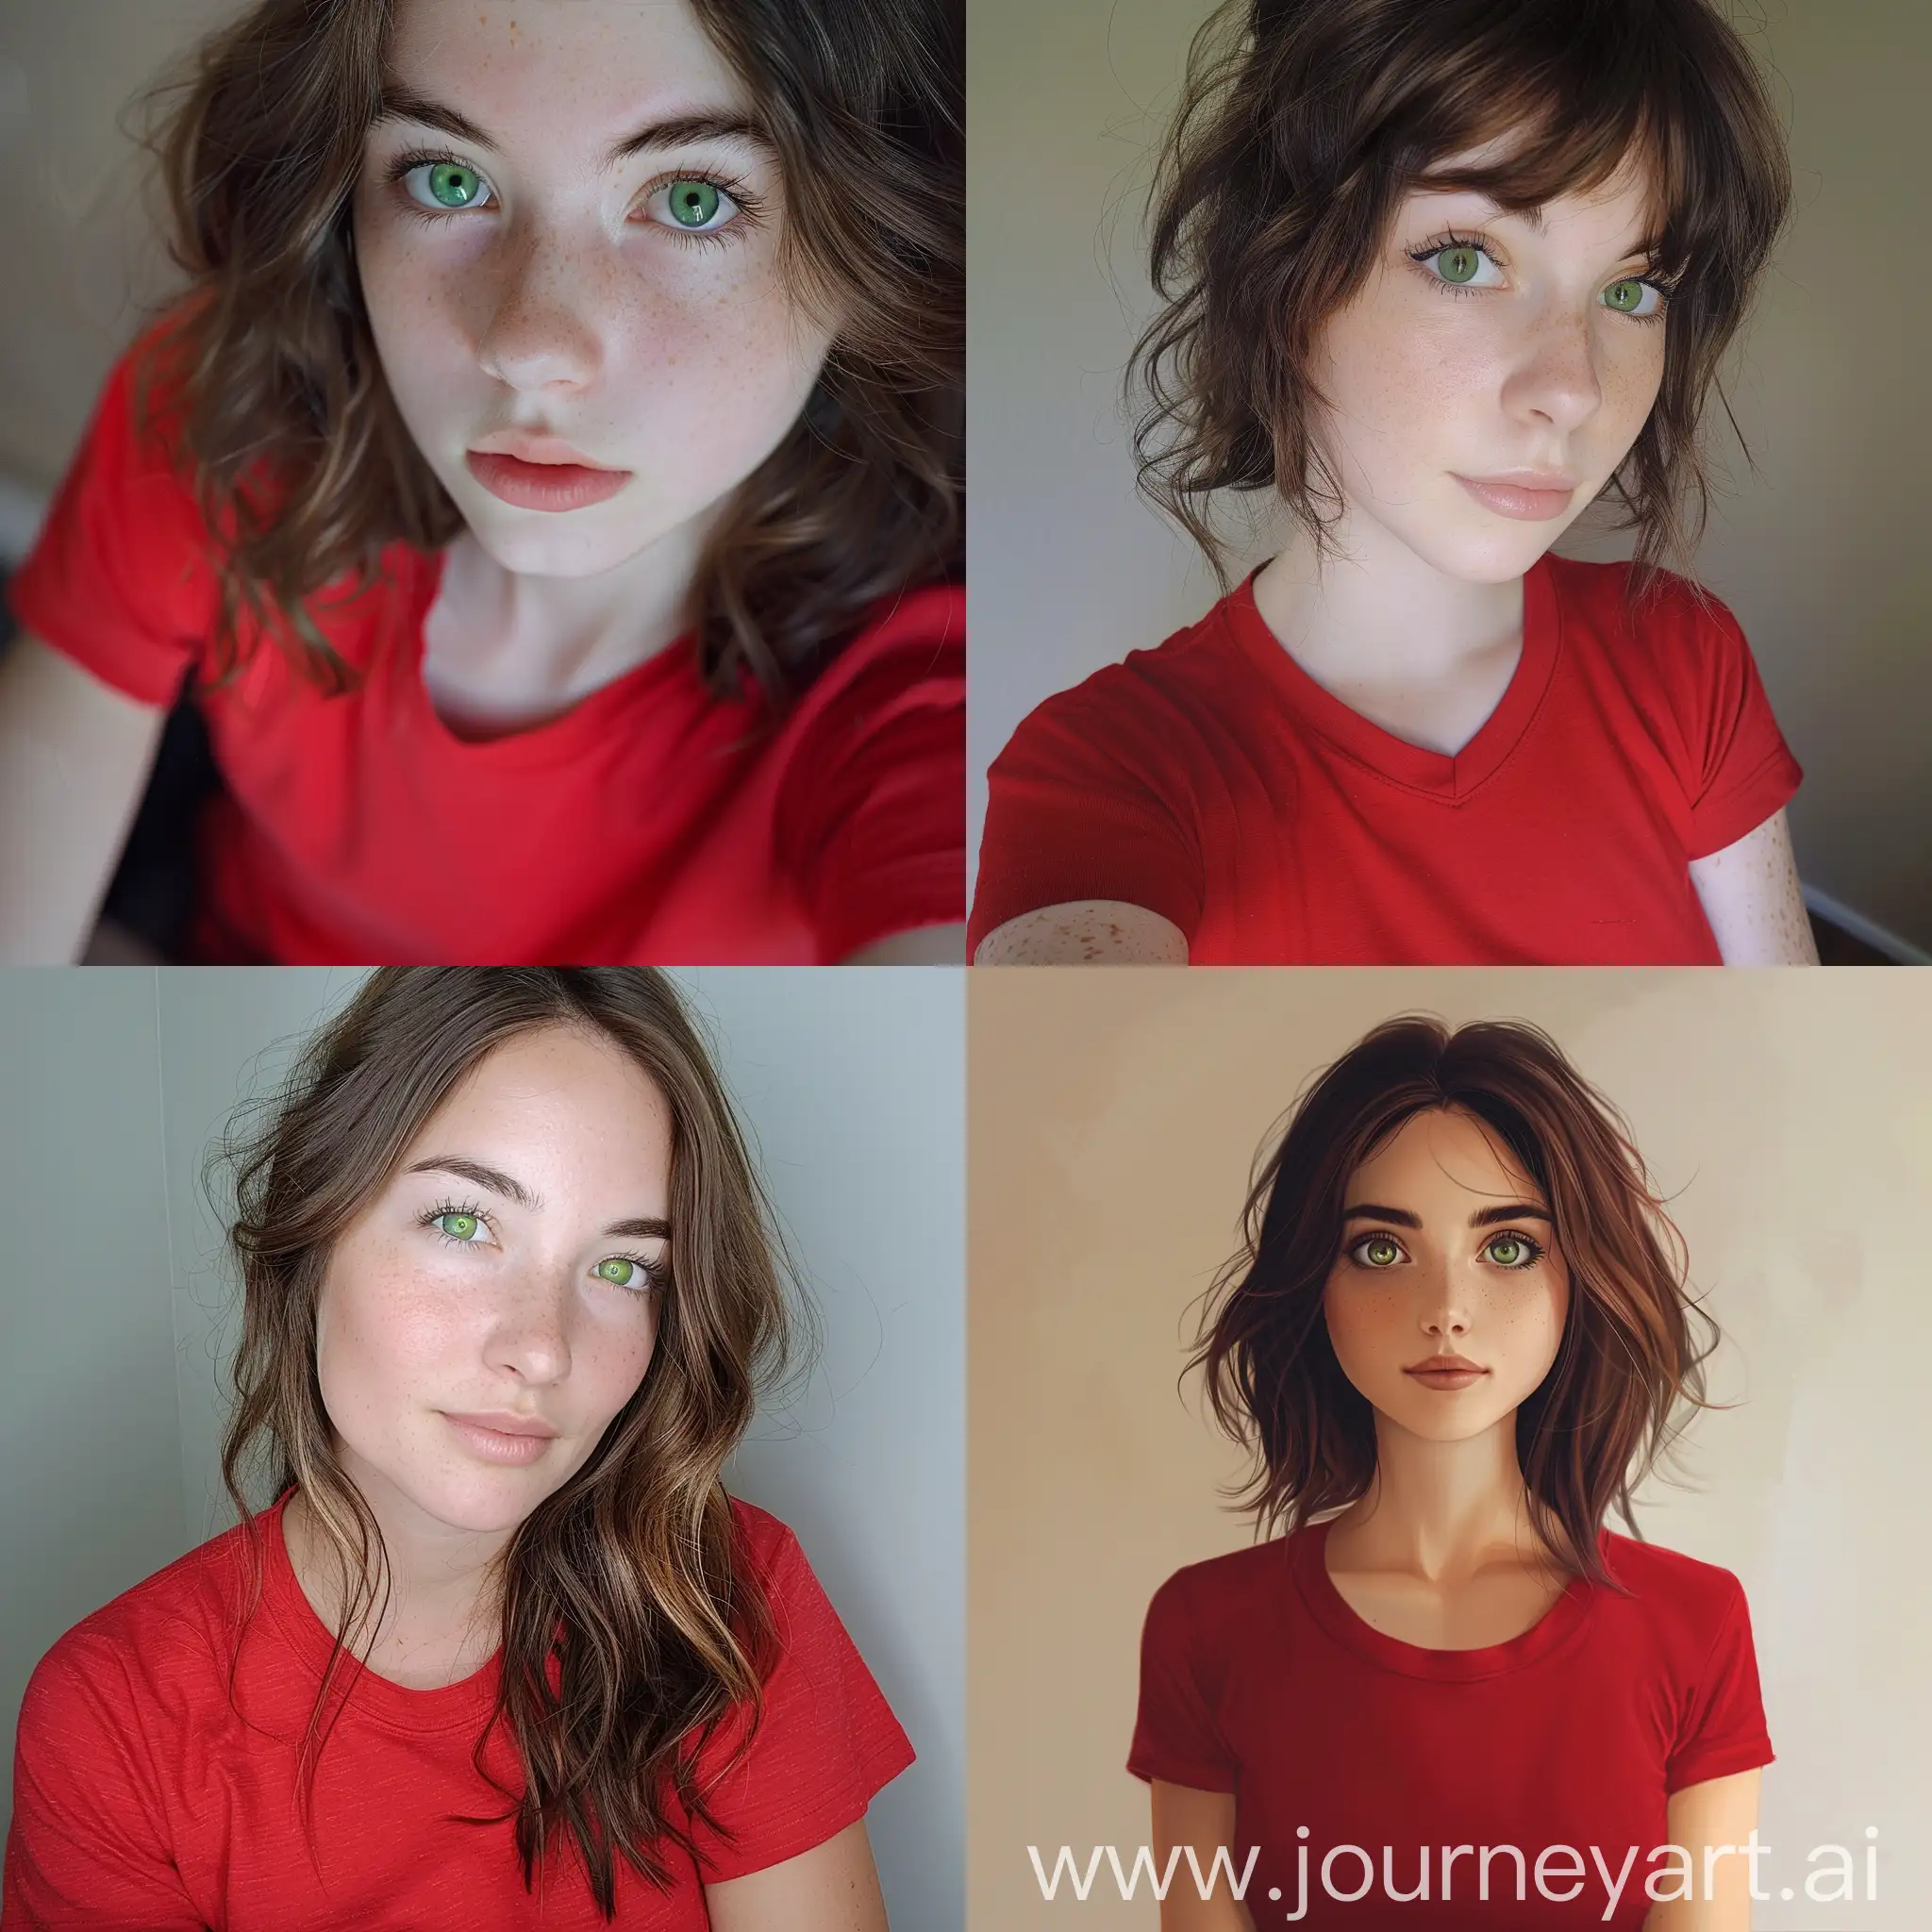 Girl with brown hair and green eyes in red t shirt